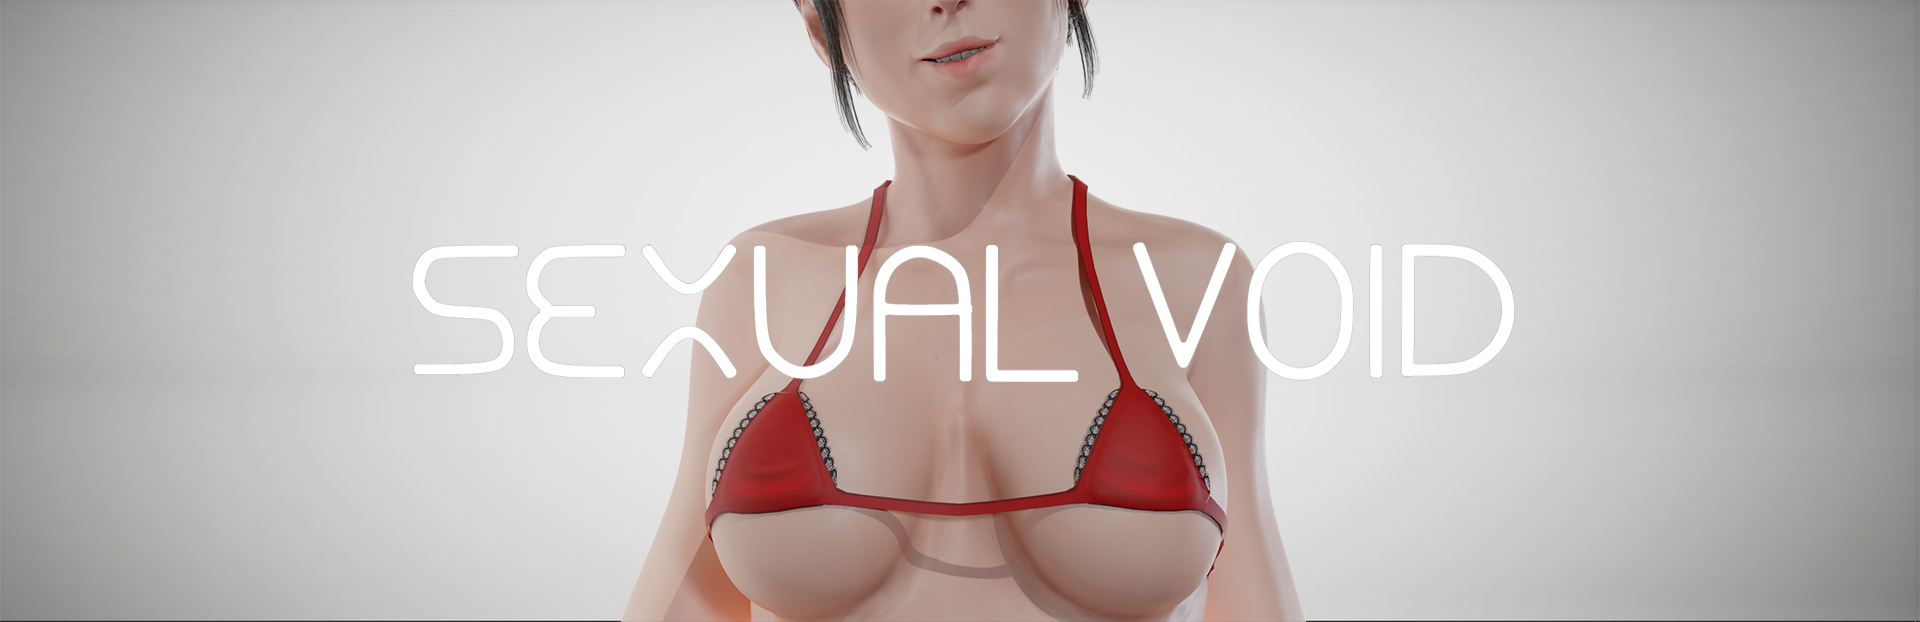 1920px x 622px - Sexual Void [COMPLETED] - free game download, reviews, mega - xGames